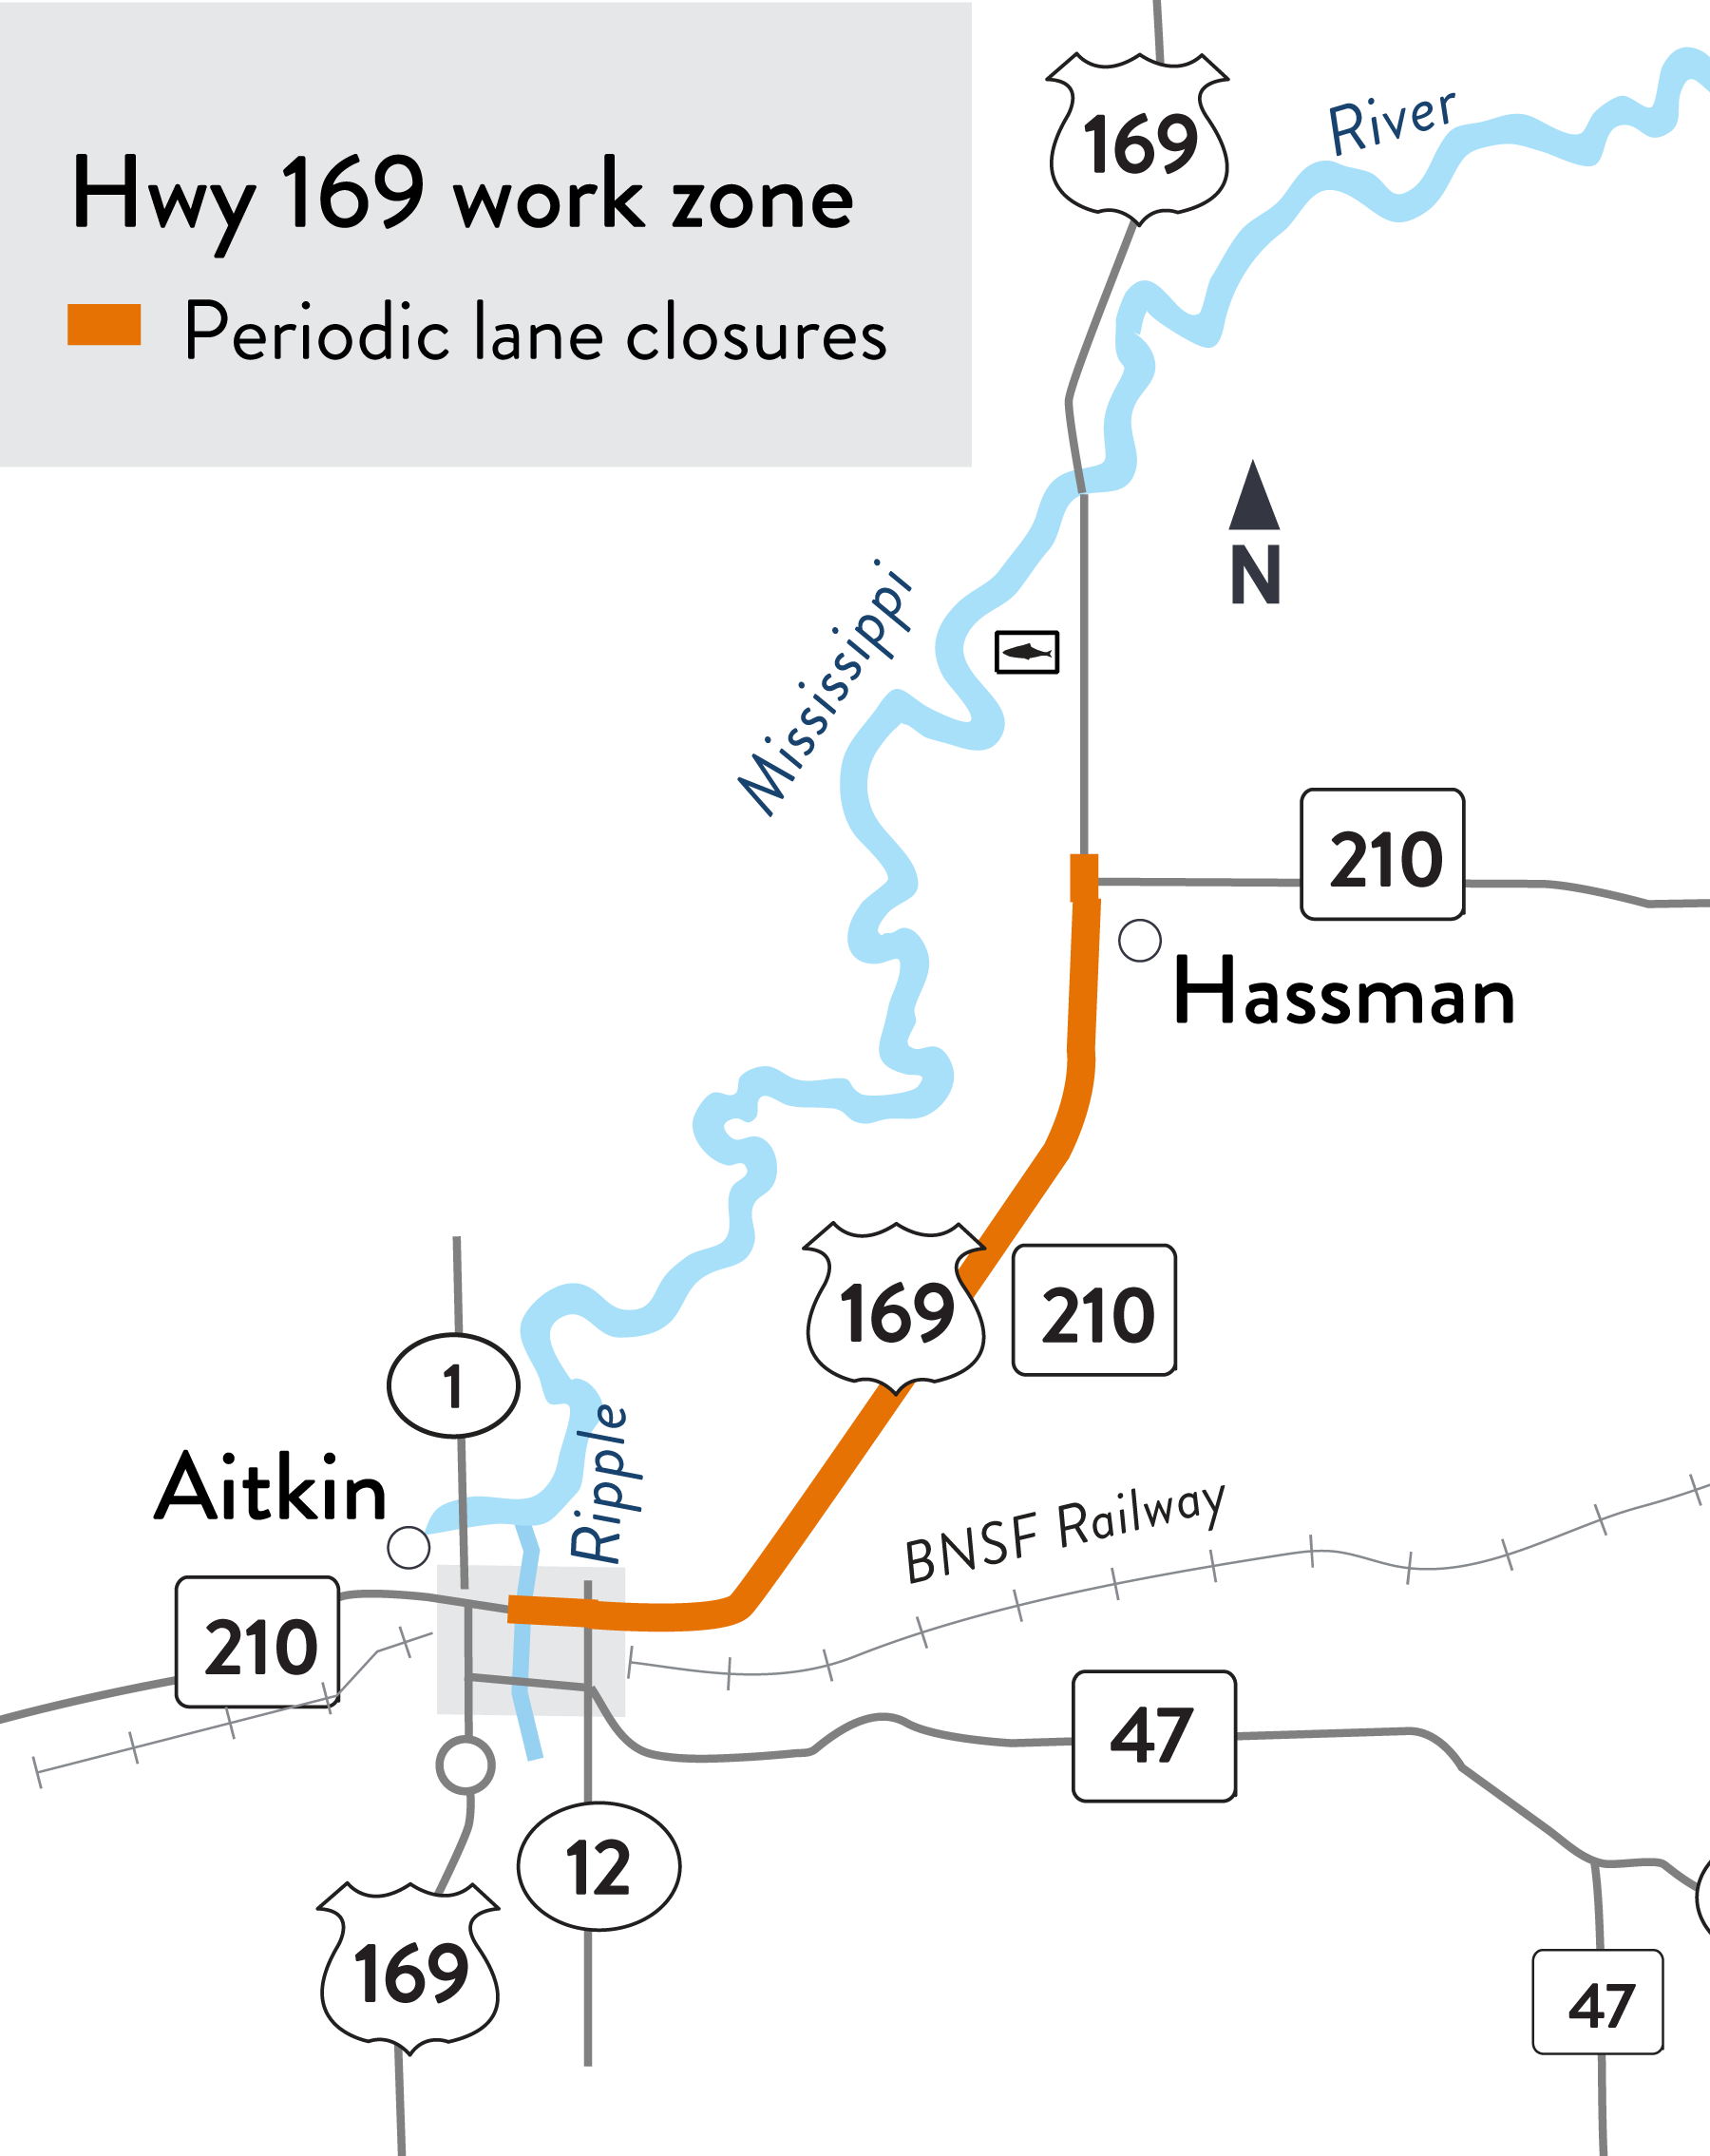 Detour in Aitkin via Hwy 169, Hwy 47 and Co. Rd. 12